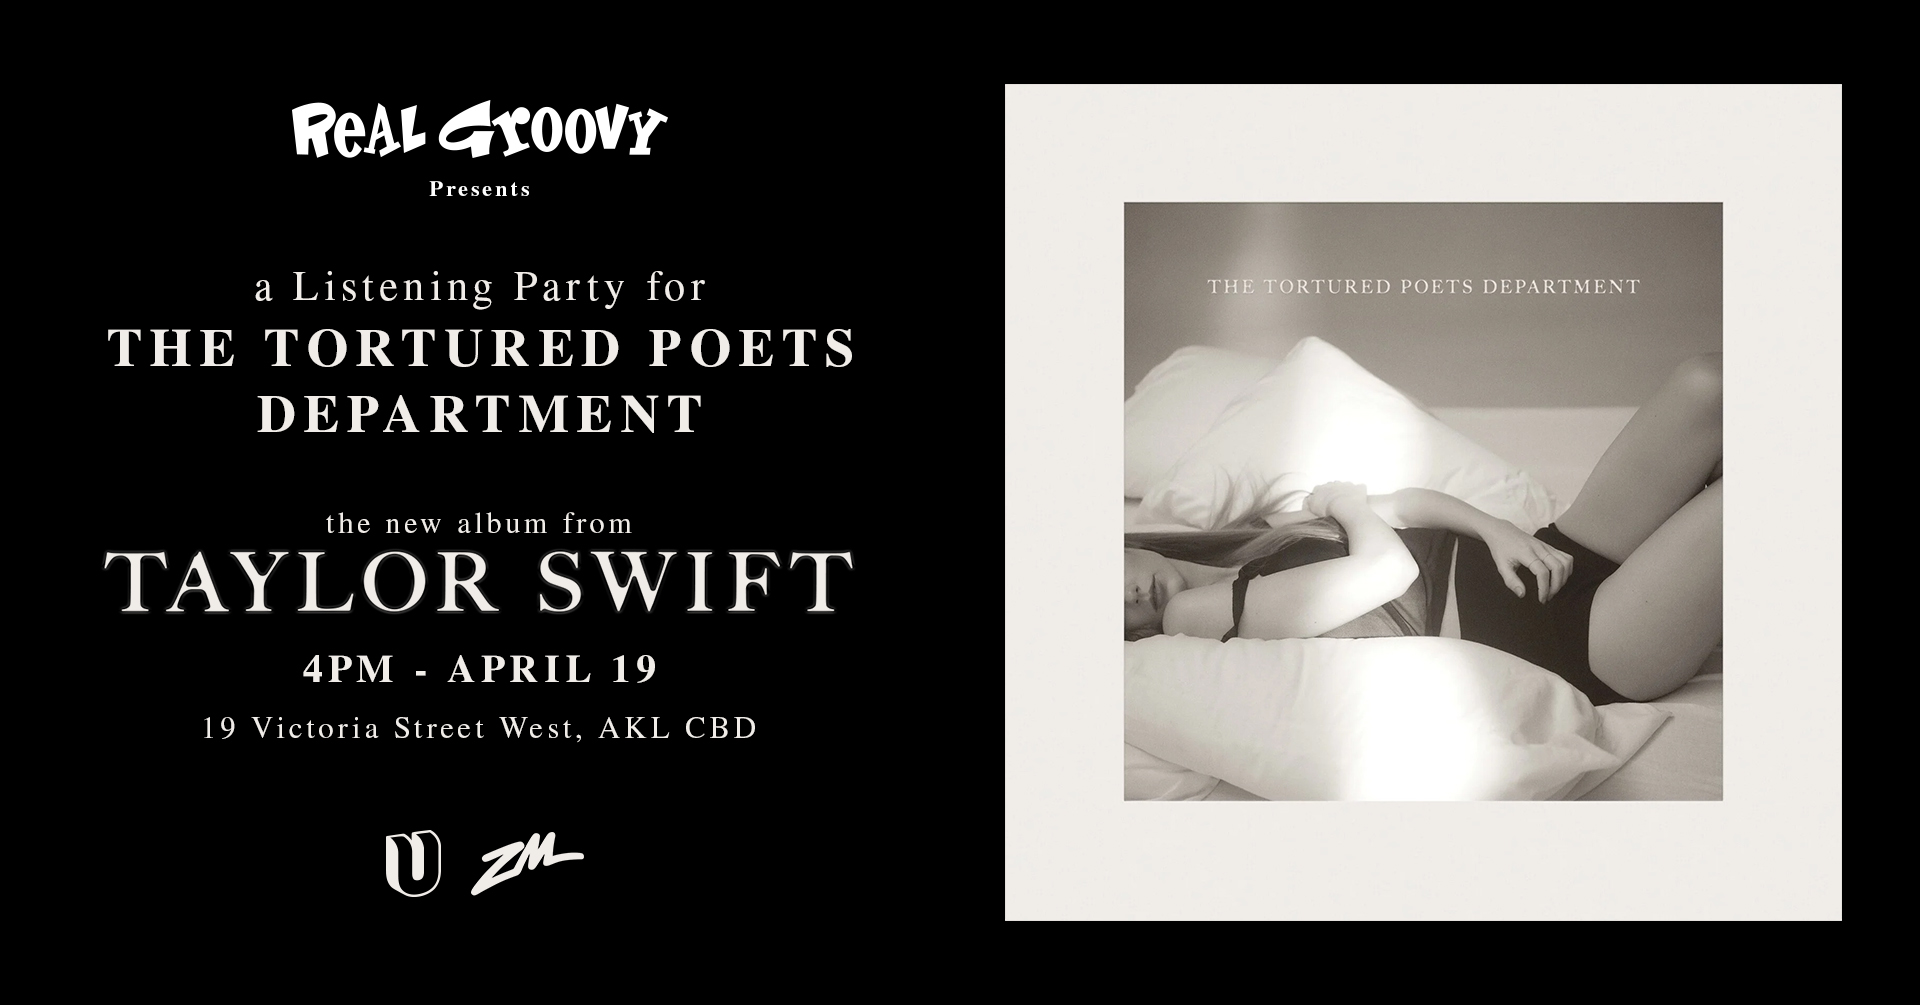 Real Groovy Presents: Taylor Swift - THE TORTURED POETS DEPARTMENT Listening Party